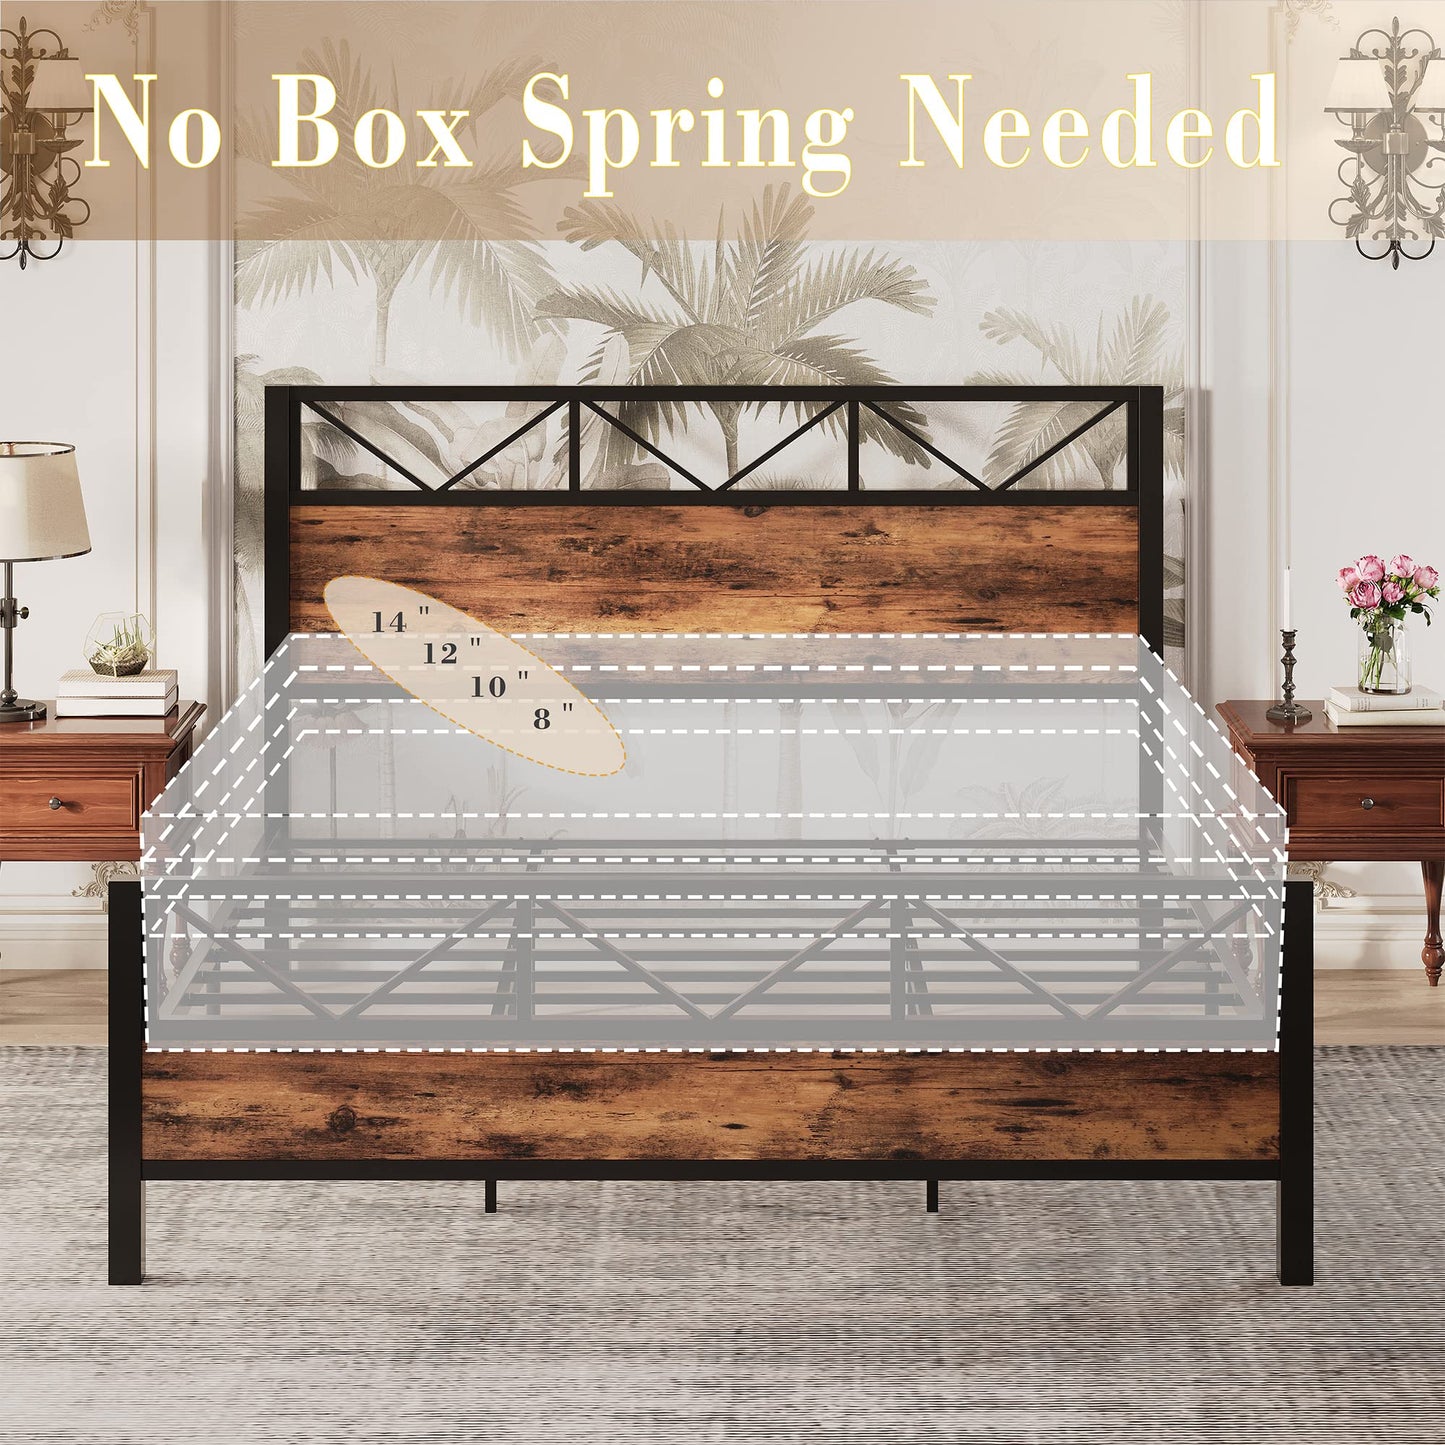 LIKIMIO King Bed Frame, Tall Industrial Headboard 51.2", Platform Bed Frame King with Strong Metal Support, Solid and Stable, Noise Free, No Box Spring Needed, Easy Assembly